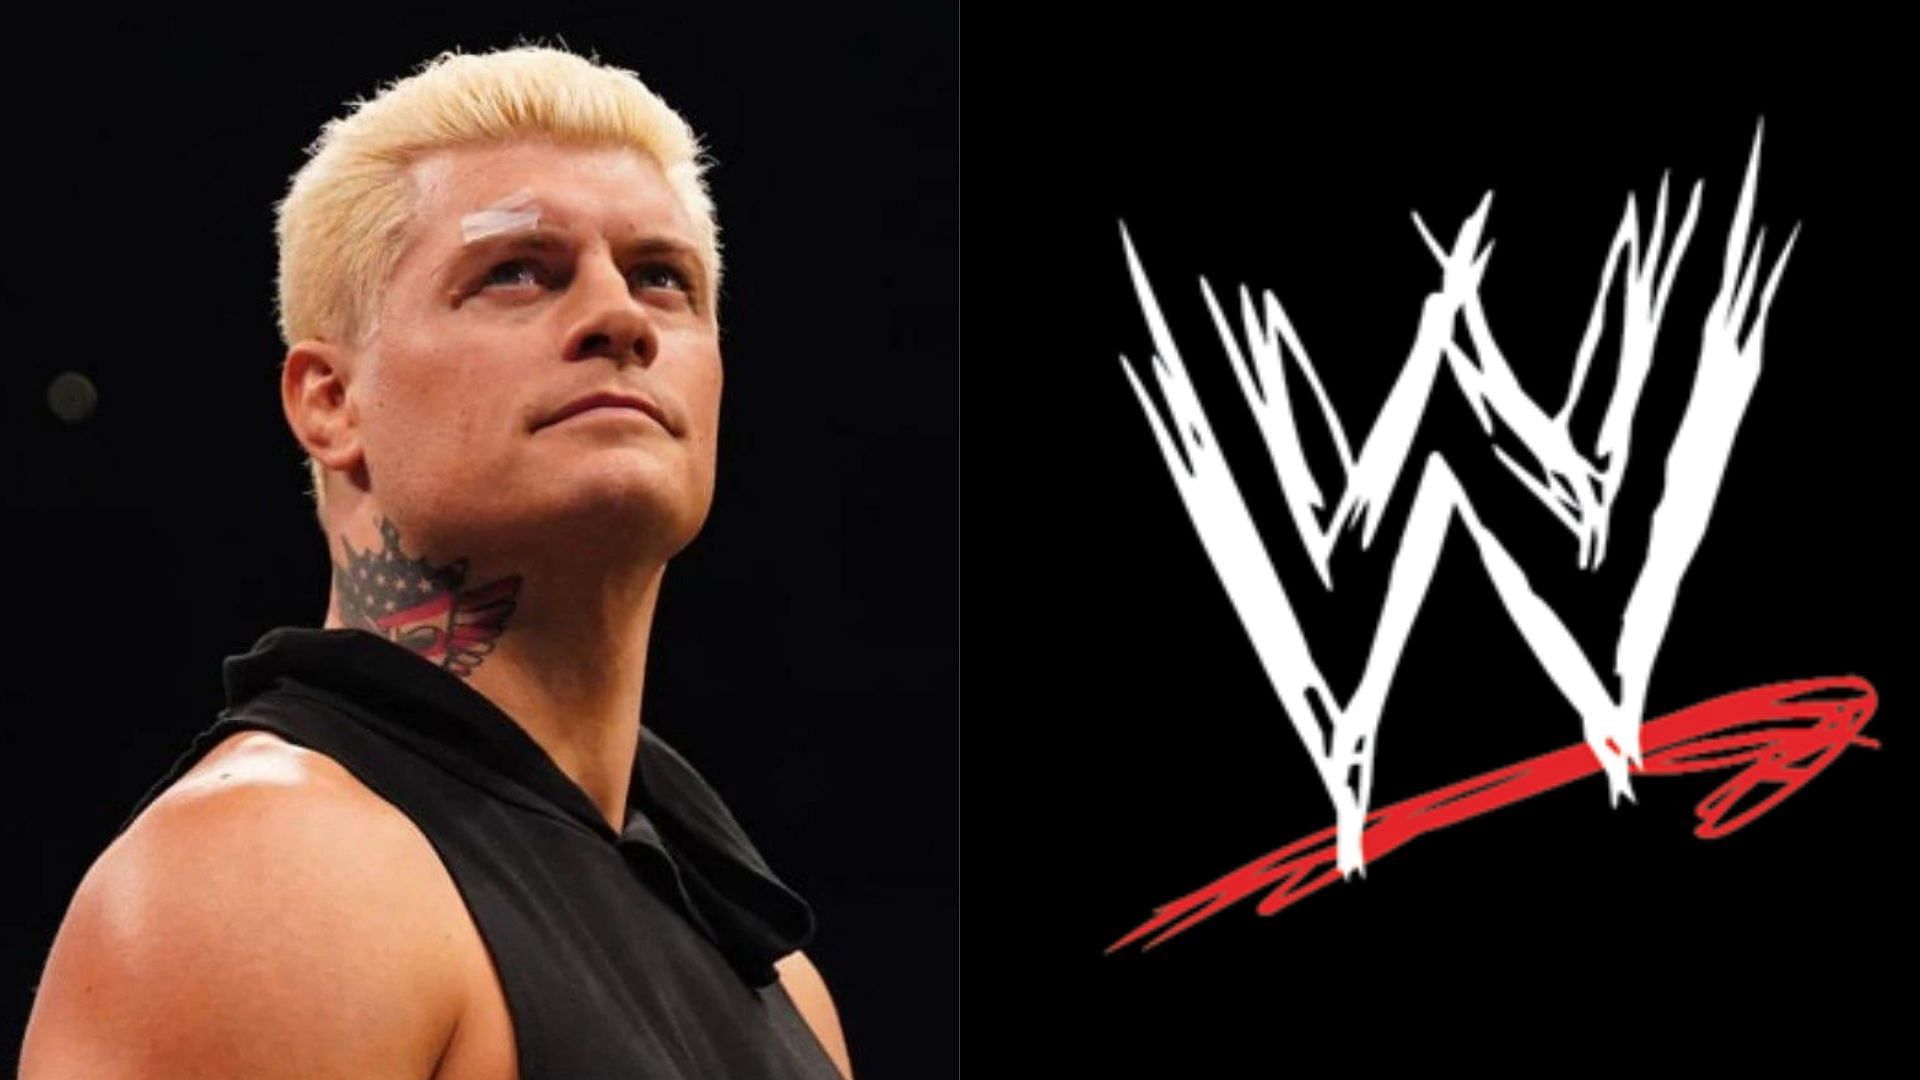 WWE Superstar Cody Rhodes last performed at Hell in a Cell